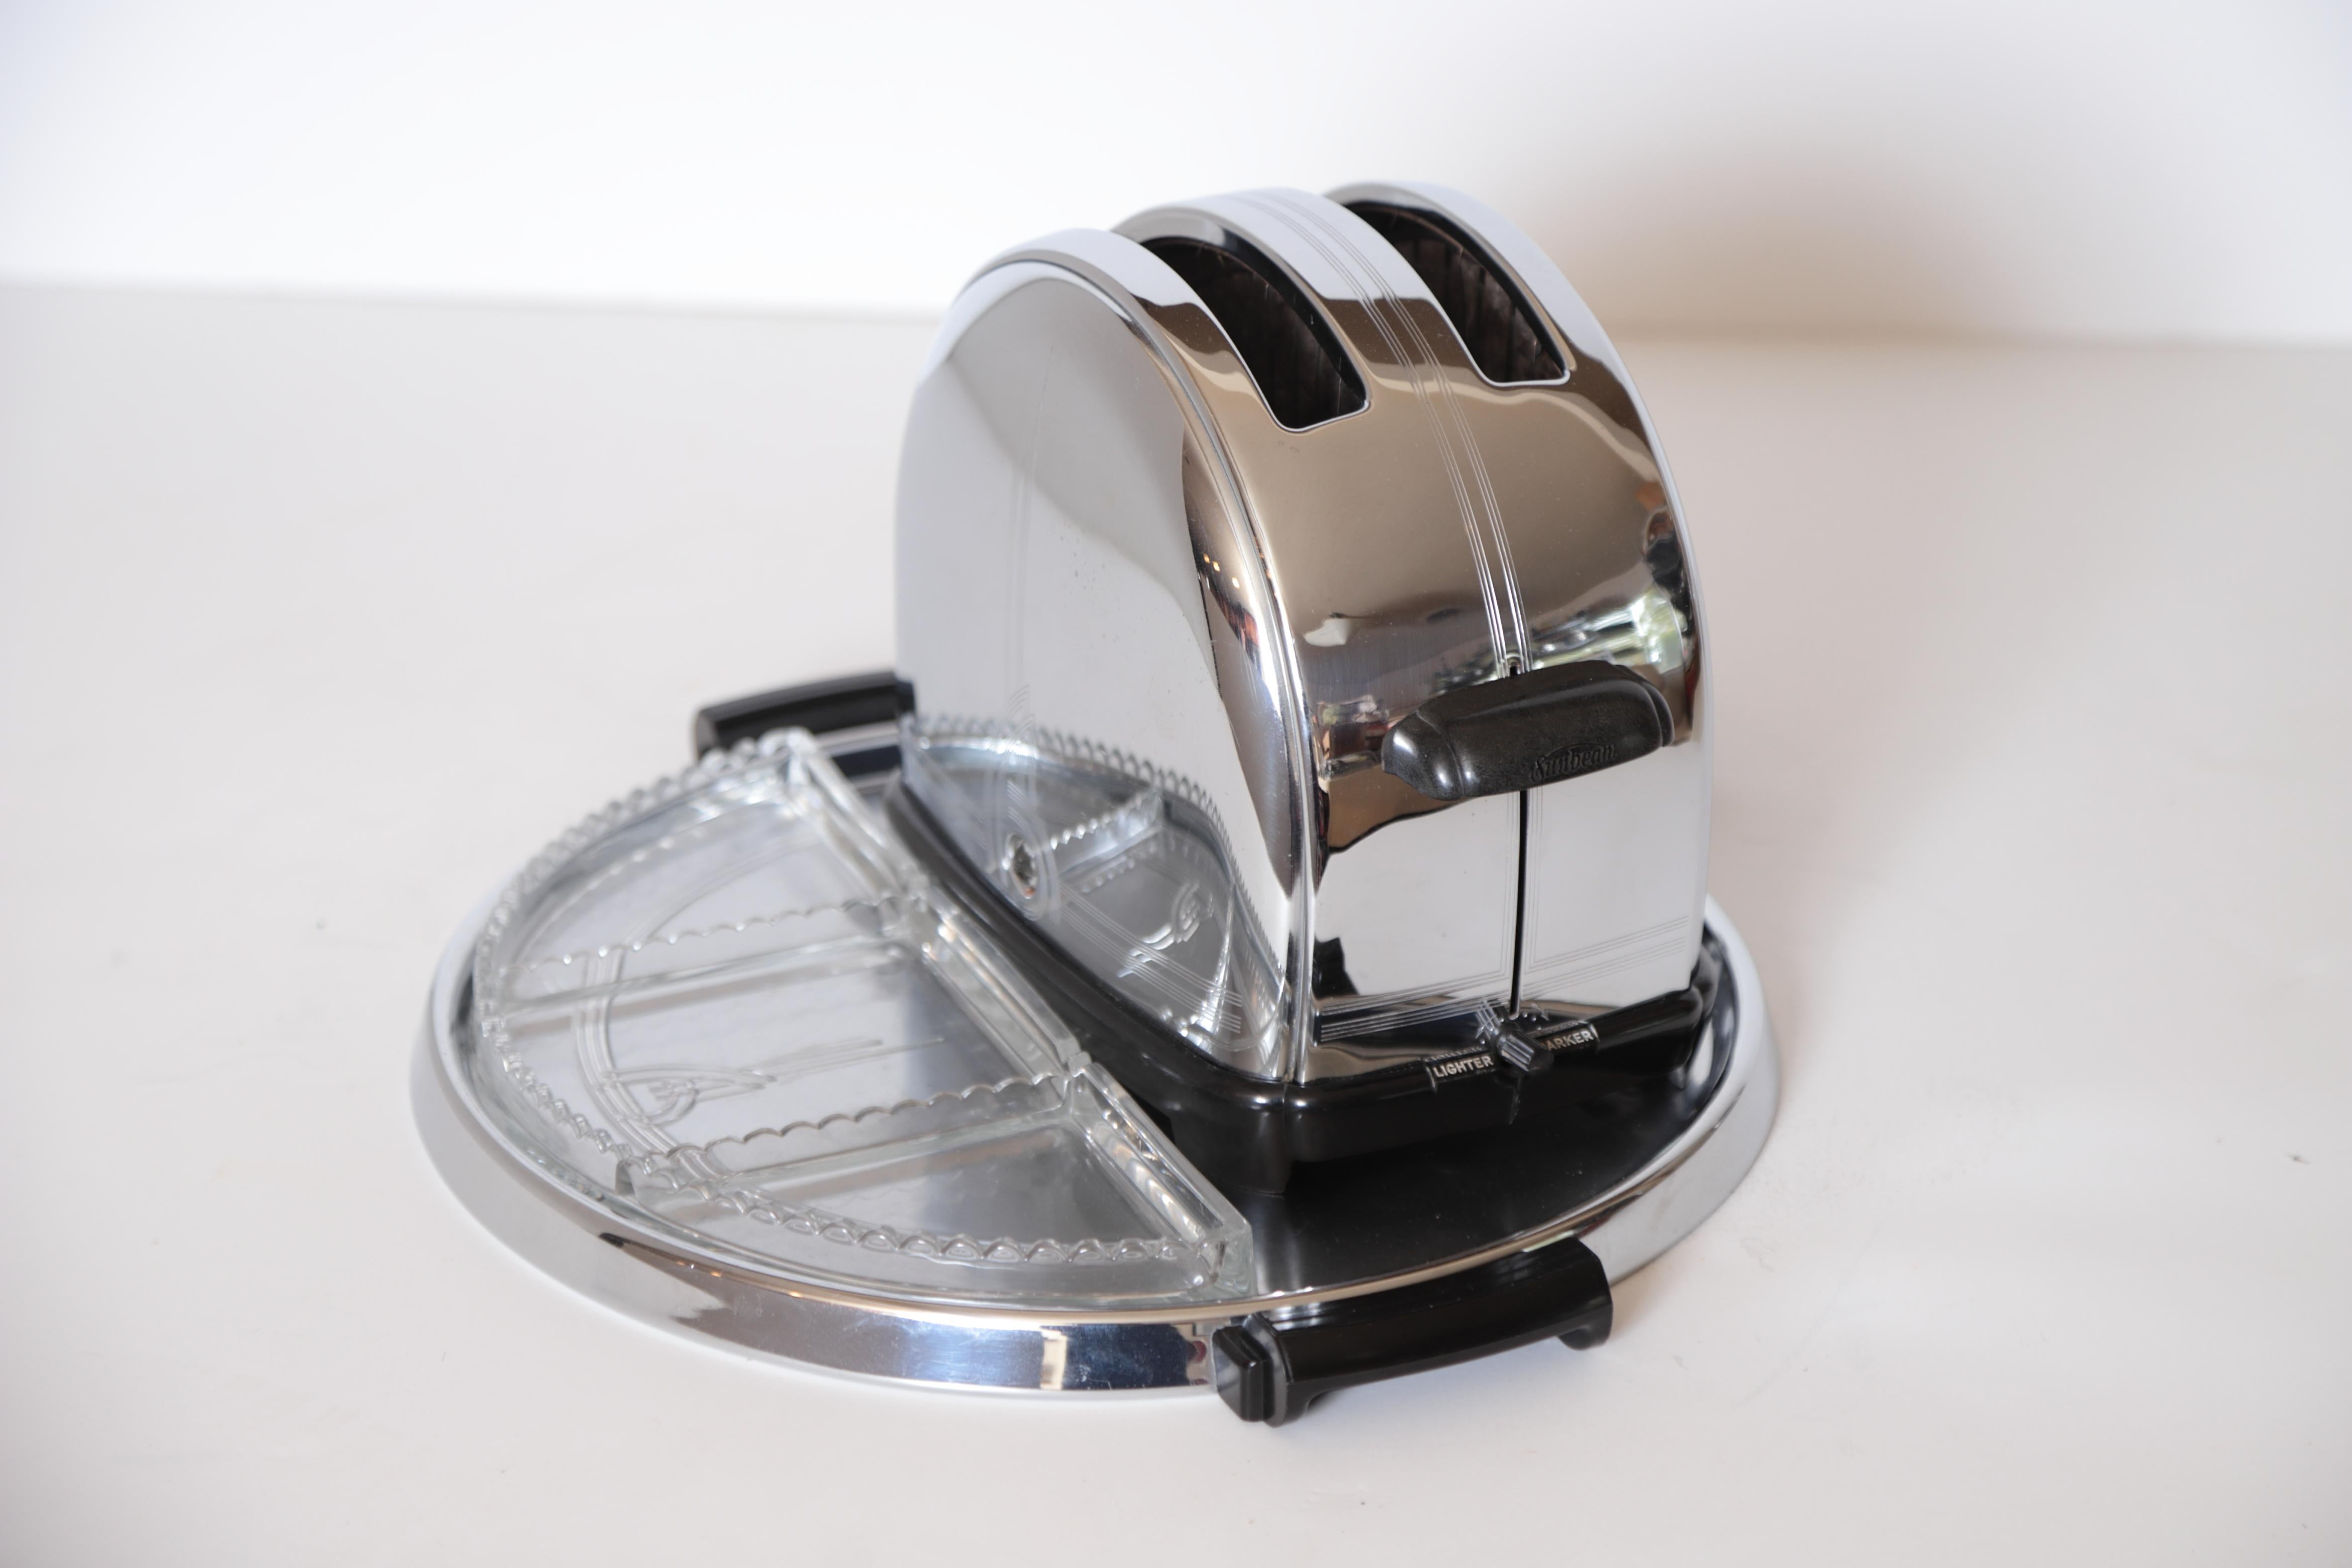 Art Deco Machine Age sunbeam T-9 toaster iconic patented complete breakfast set  Modernist  Streamline Industrial Design

Another of the original Classic American Industrial Modernist re-designs of utilitarian objects for every-man. Allegedly